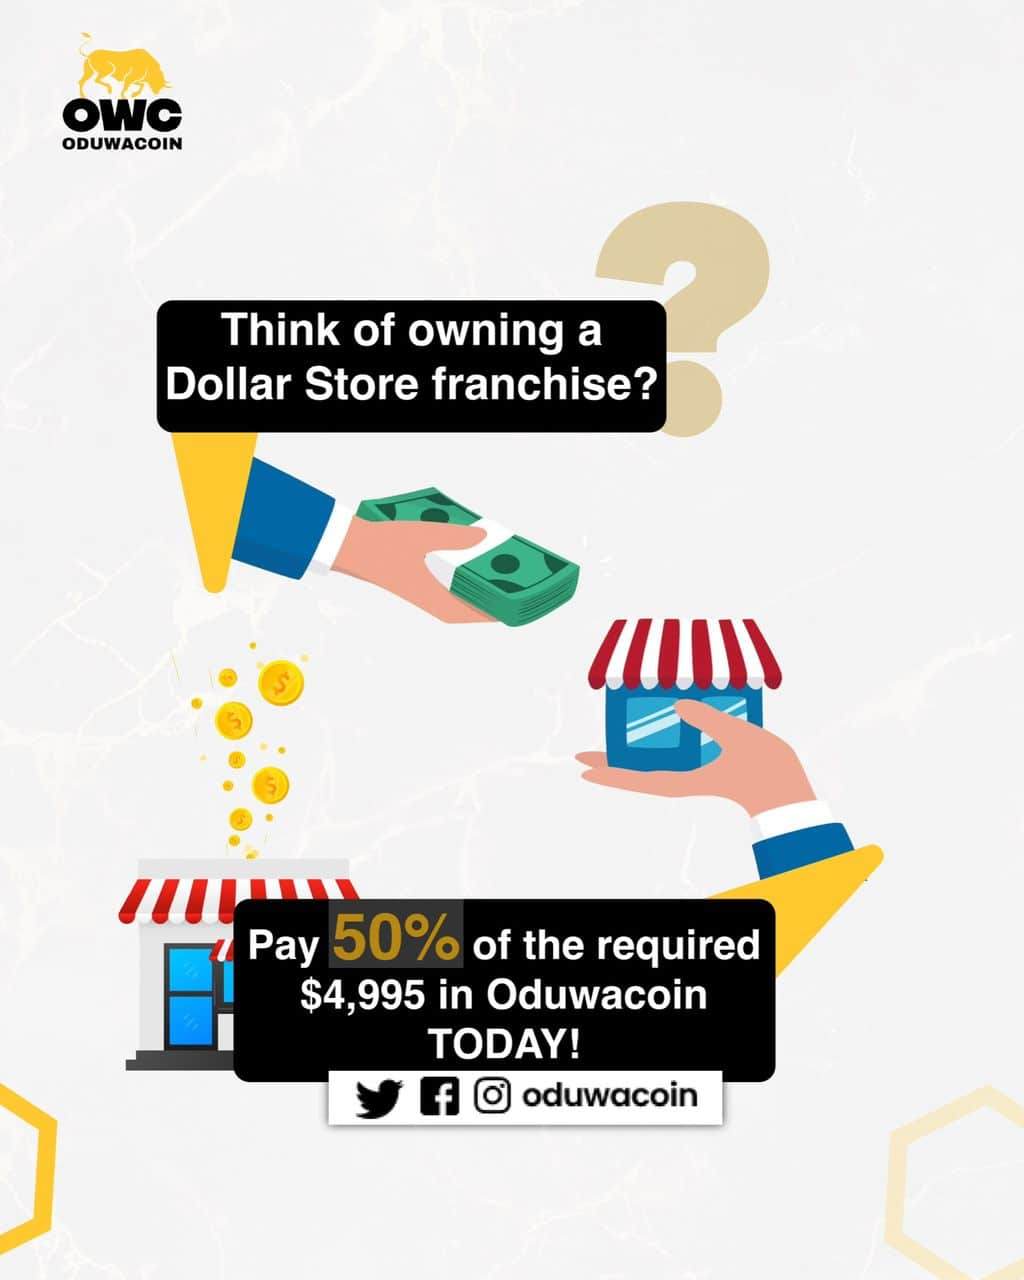 Limited Time Offer: Pay 50% in Oduwacoin for Dollar Store Franchise Ownership